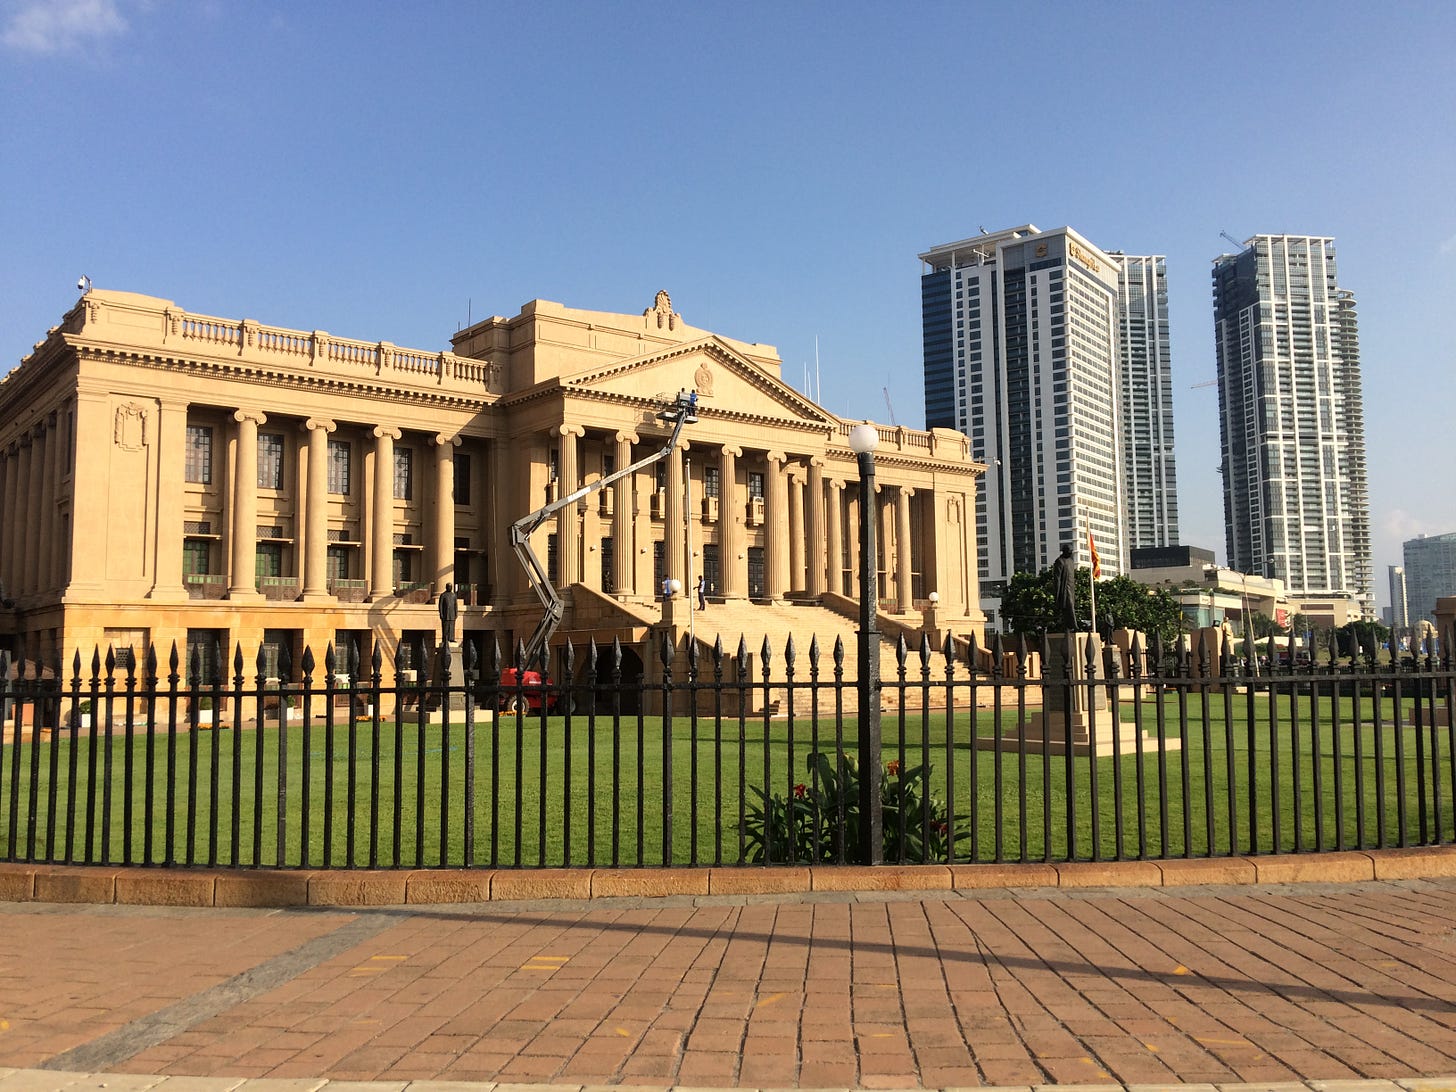 Sri Lanka's old parliament building in Colombo which houses the Presidential Secretariat. The compound was overrun by protesters this week. (Image: Nachiket Deuskar/Untwined)